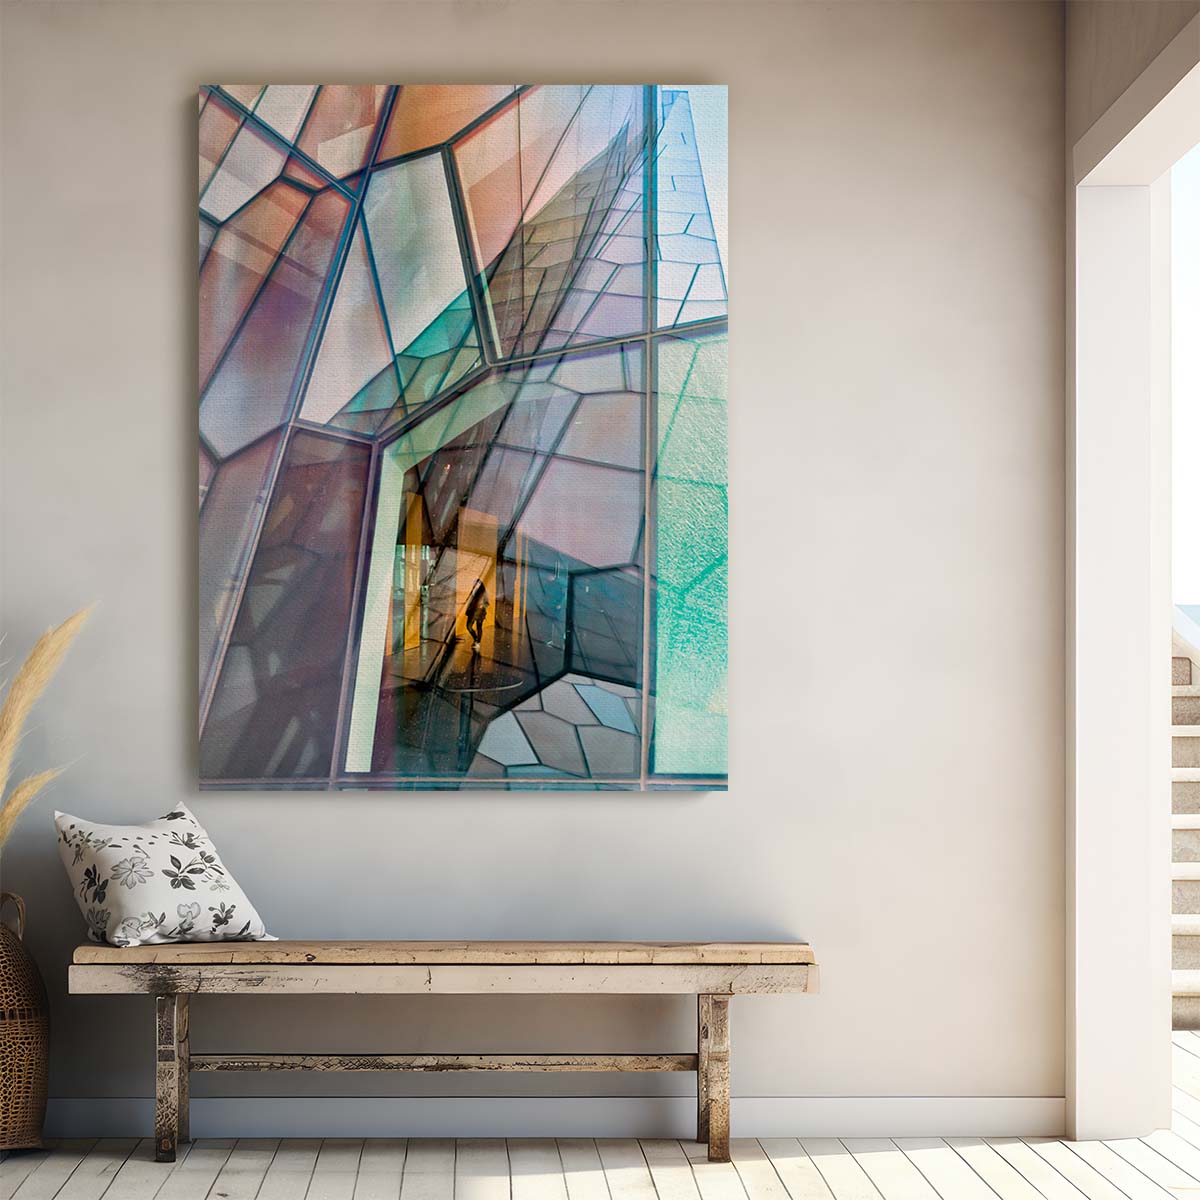 Abstract Pastel Mosaic Window Architecture Photography Wall Art by Luxuriance Designs, made in USA